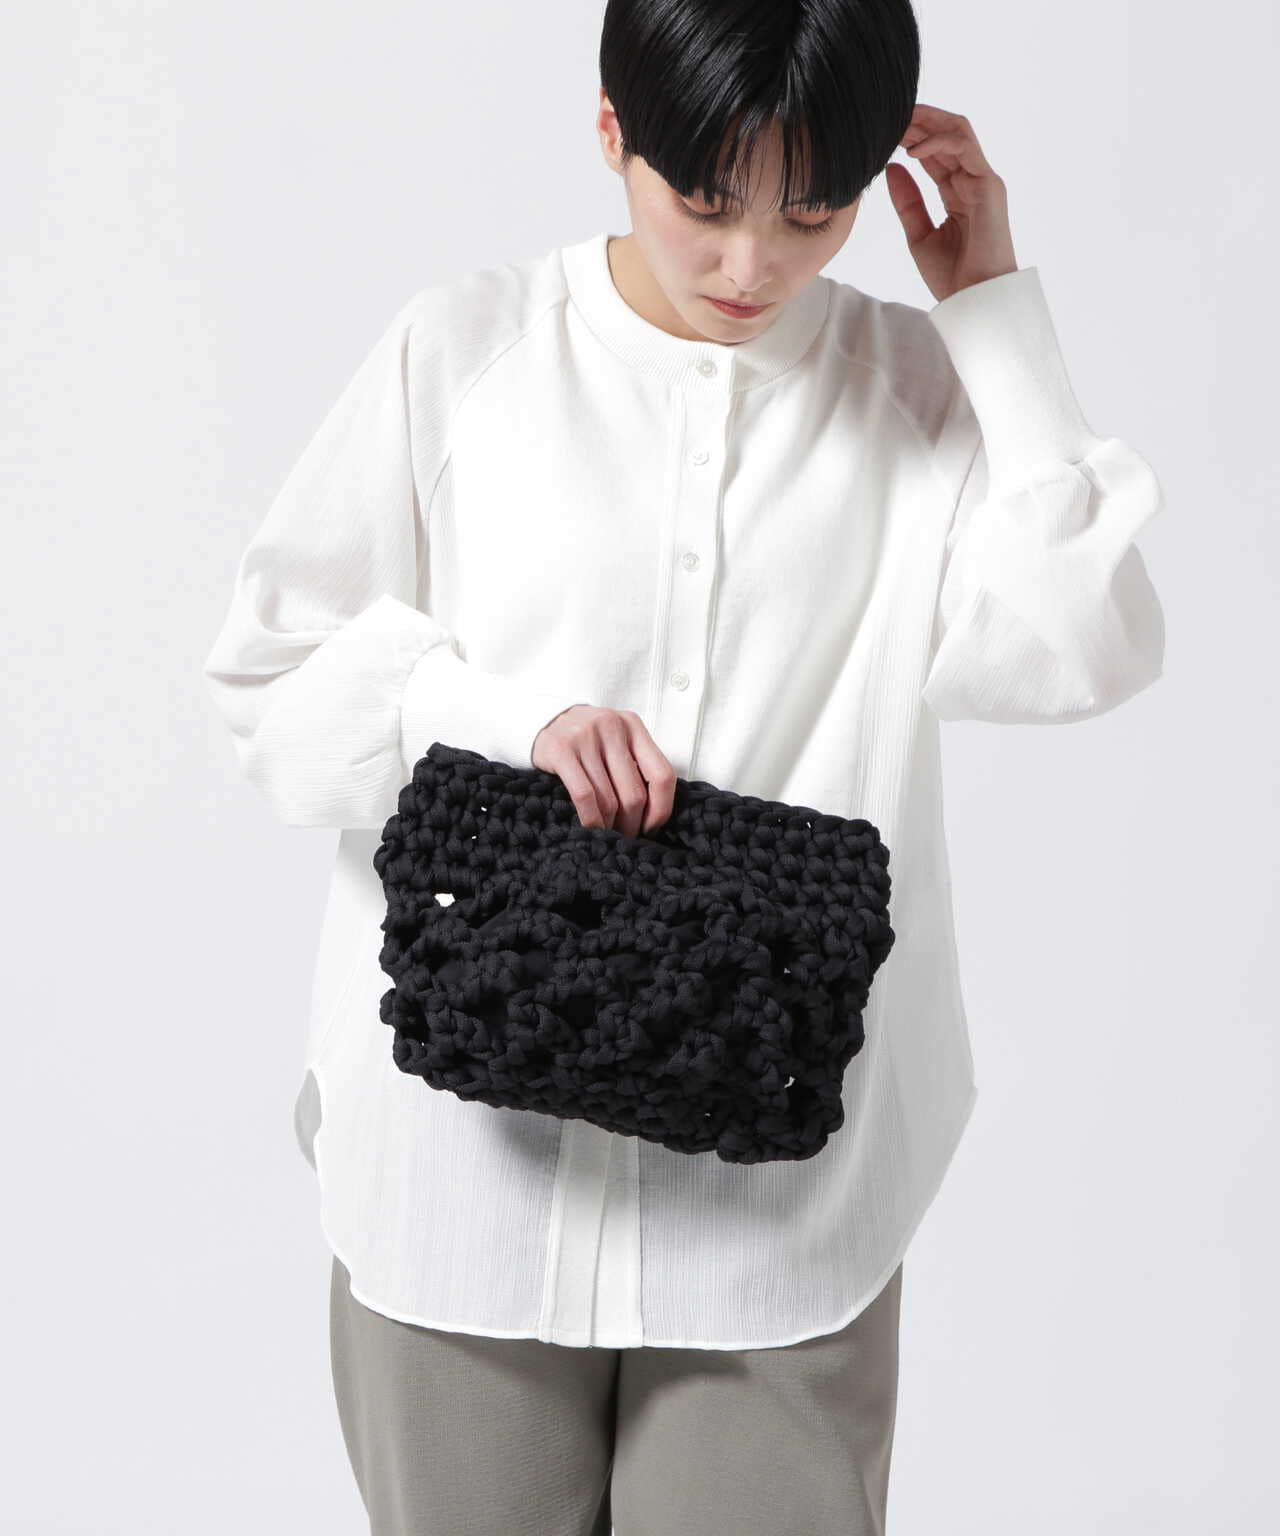 KNii(ニー) THE BASKET | B'2nd ( ビーセカンド ) | US ONLINE STORE